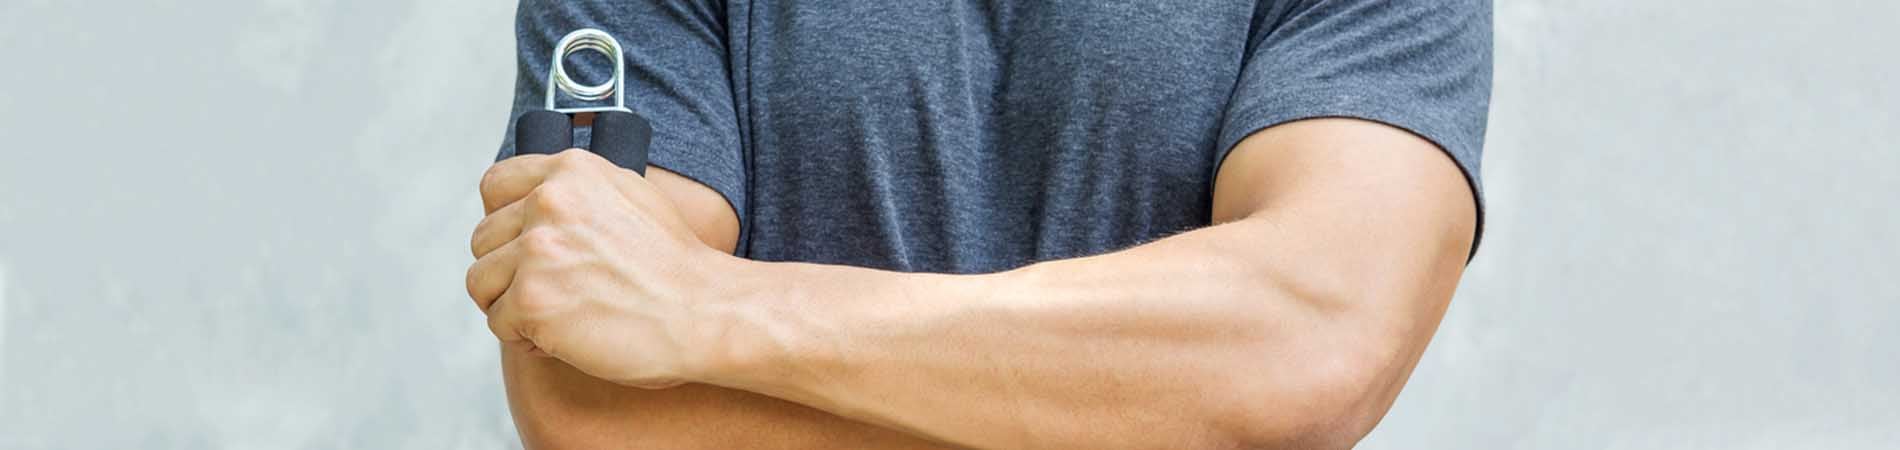 How to Improve Grip Strength: 7 Best Exercises - Old School Labs